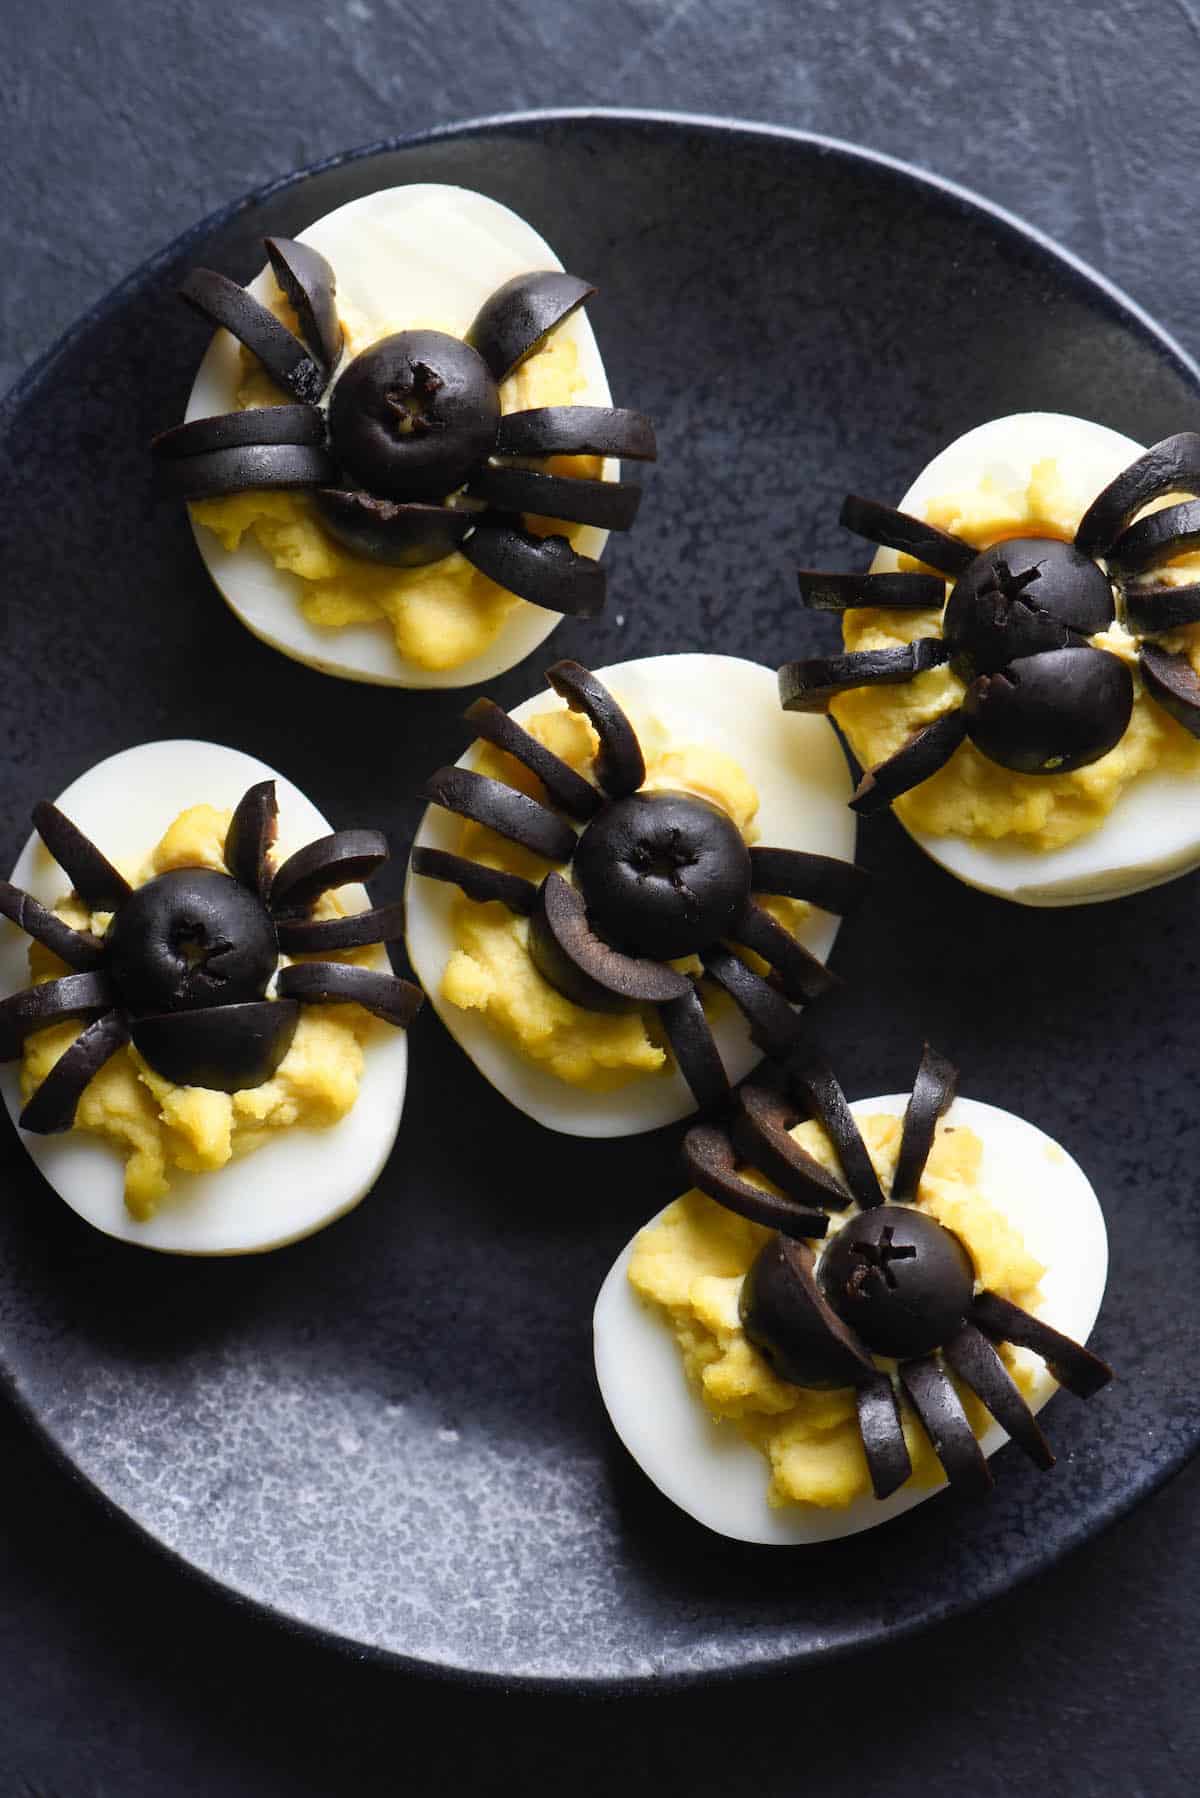 Black plate with deviled eggs on top. Black olives cut into the shape of spiders decorate the tops of the eggs.